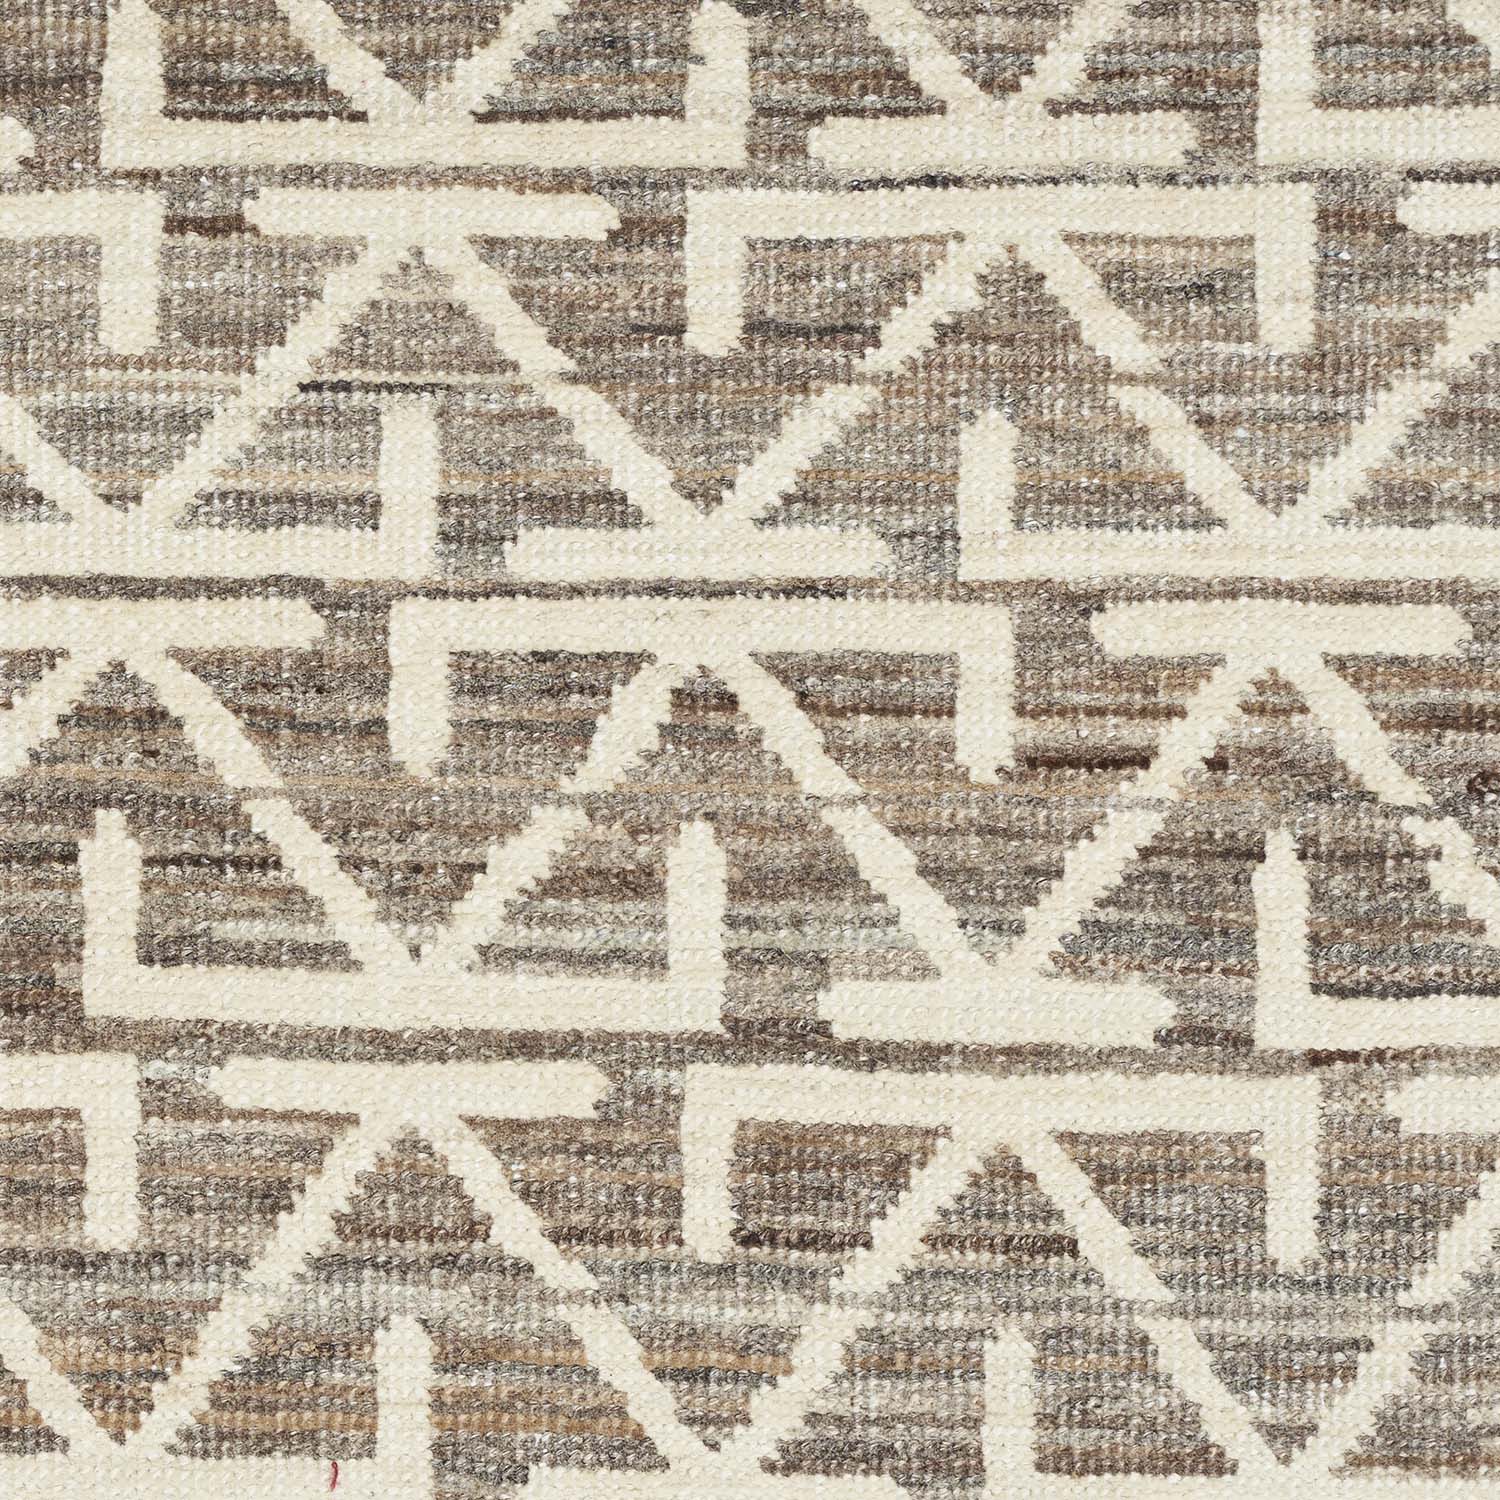 Close-up of a cream geometric patterned fabric or carpet texture.